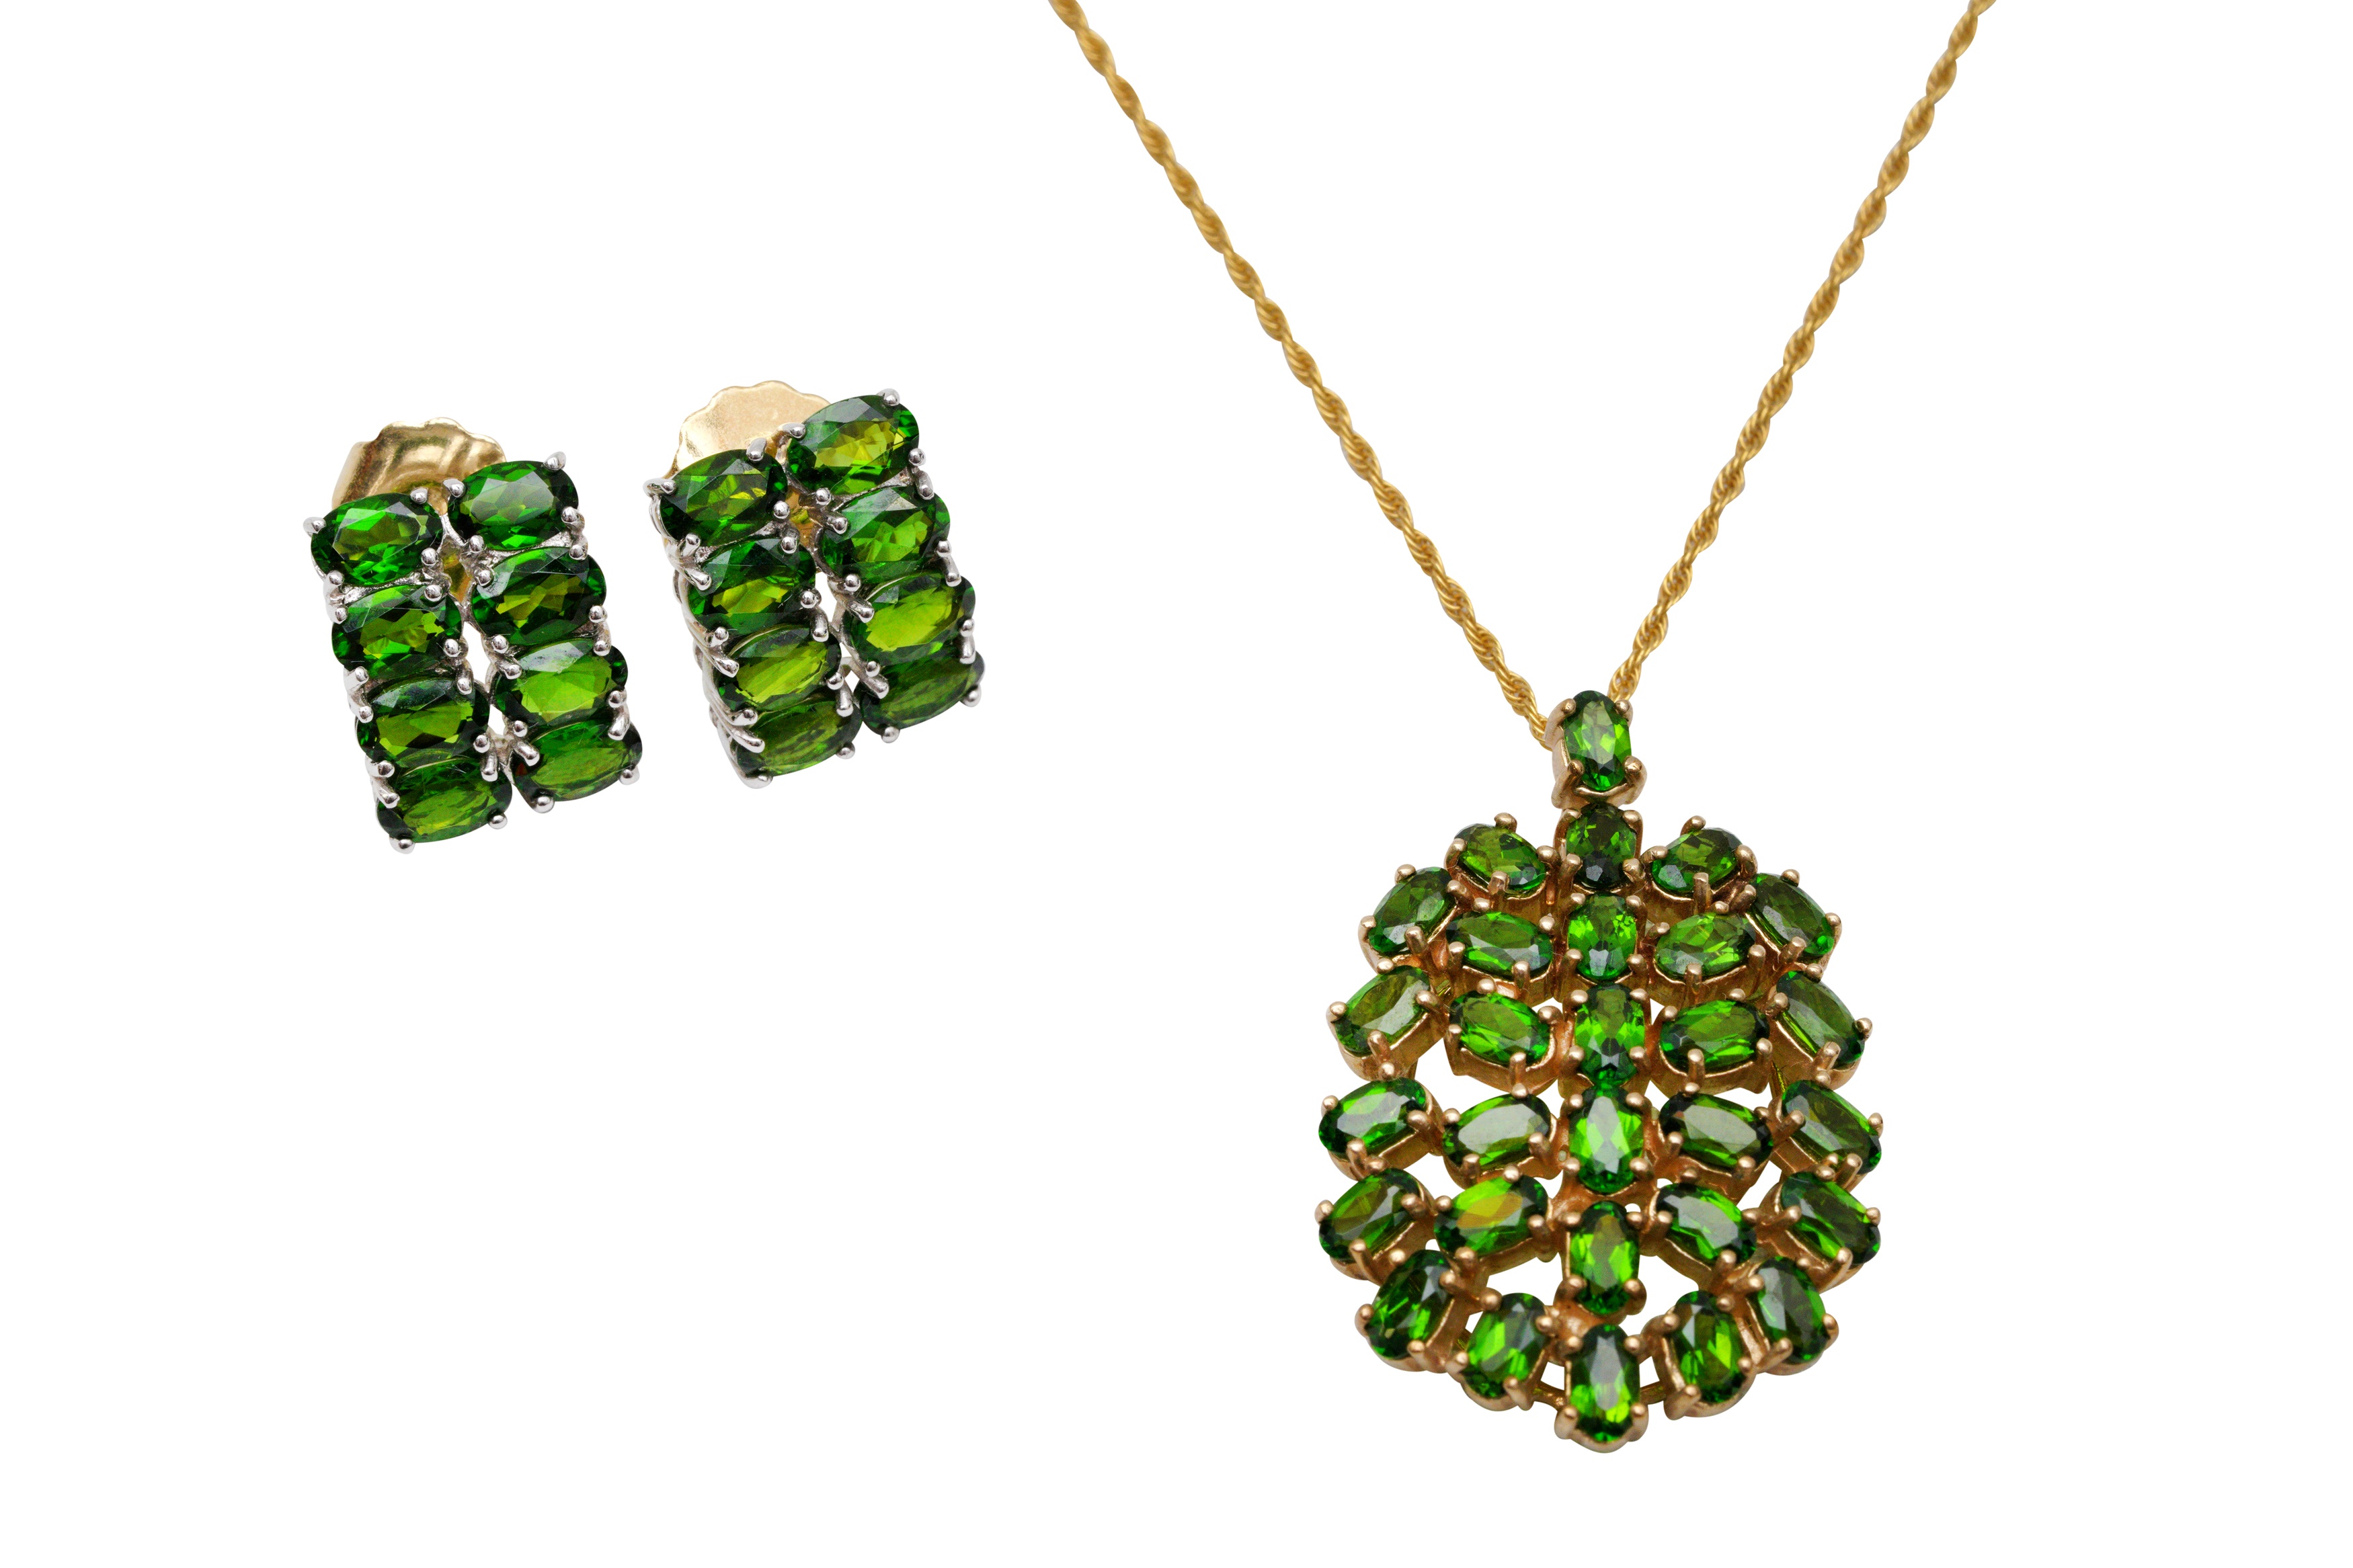 A 9CT GOLD DIOPSIDE PENDANT NECKLACE AND EARRINGS - Image 2 of 3